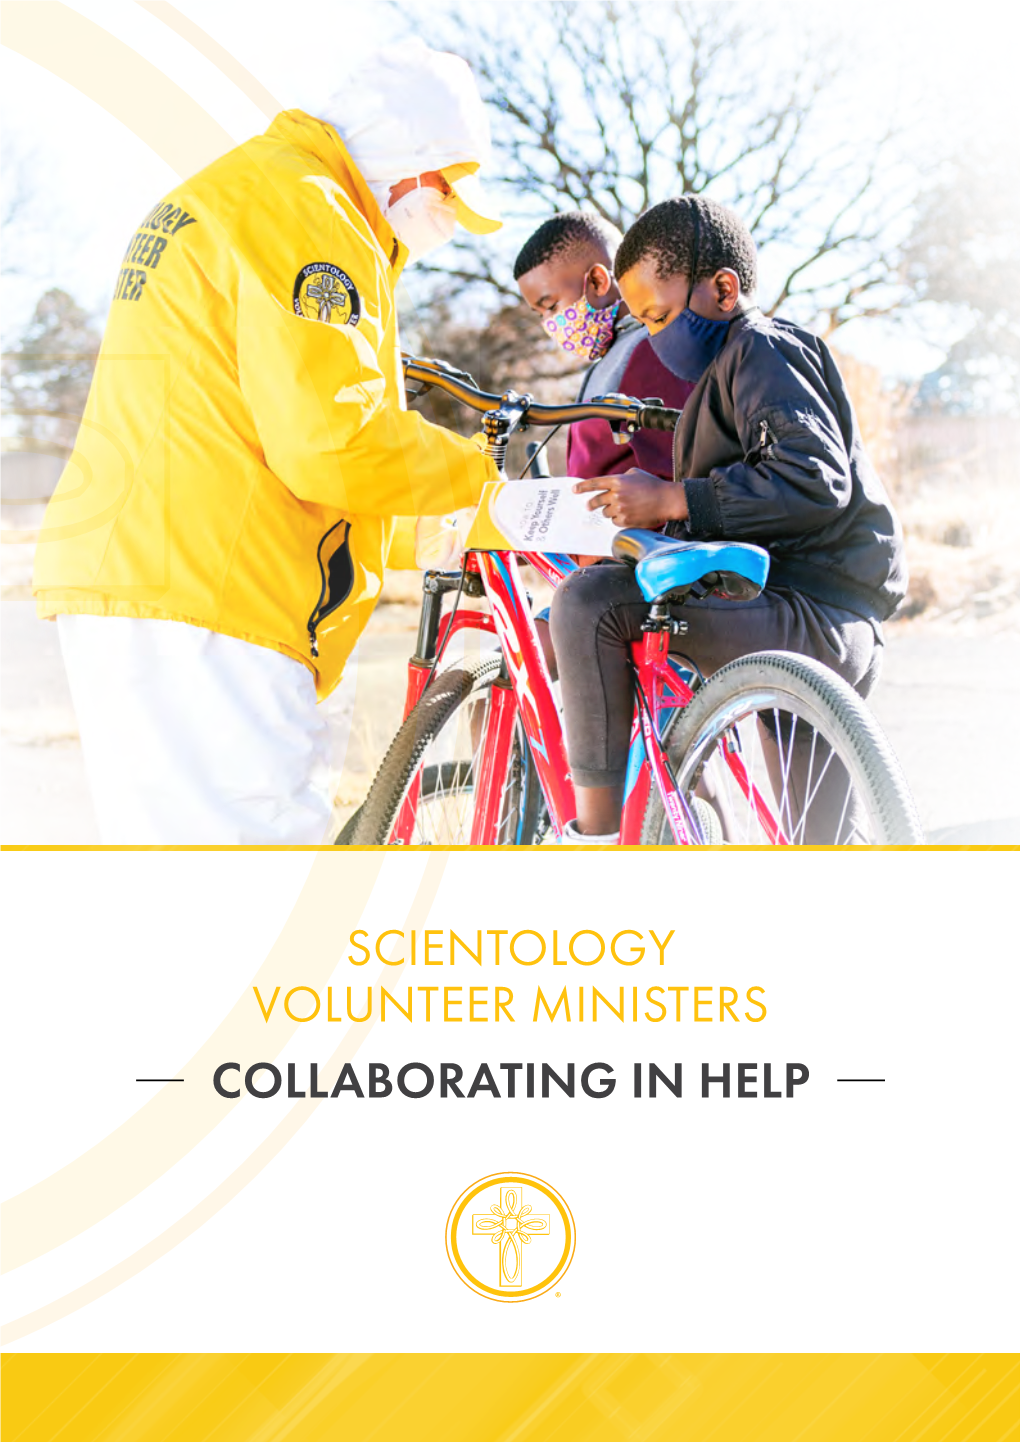 Scientology Volunteer Ministers Collaborating in Help